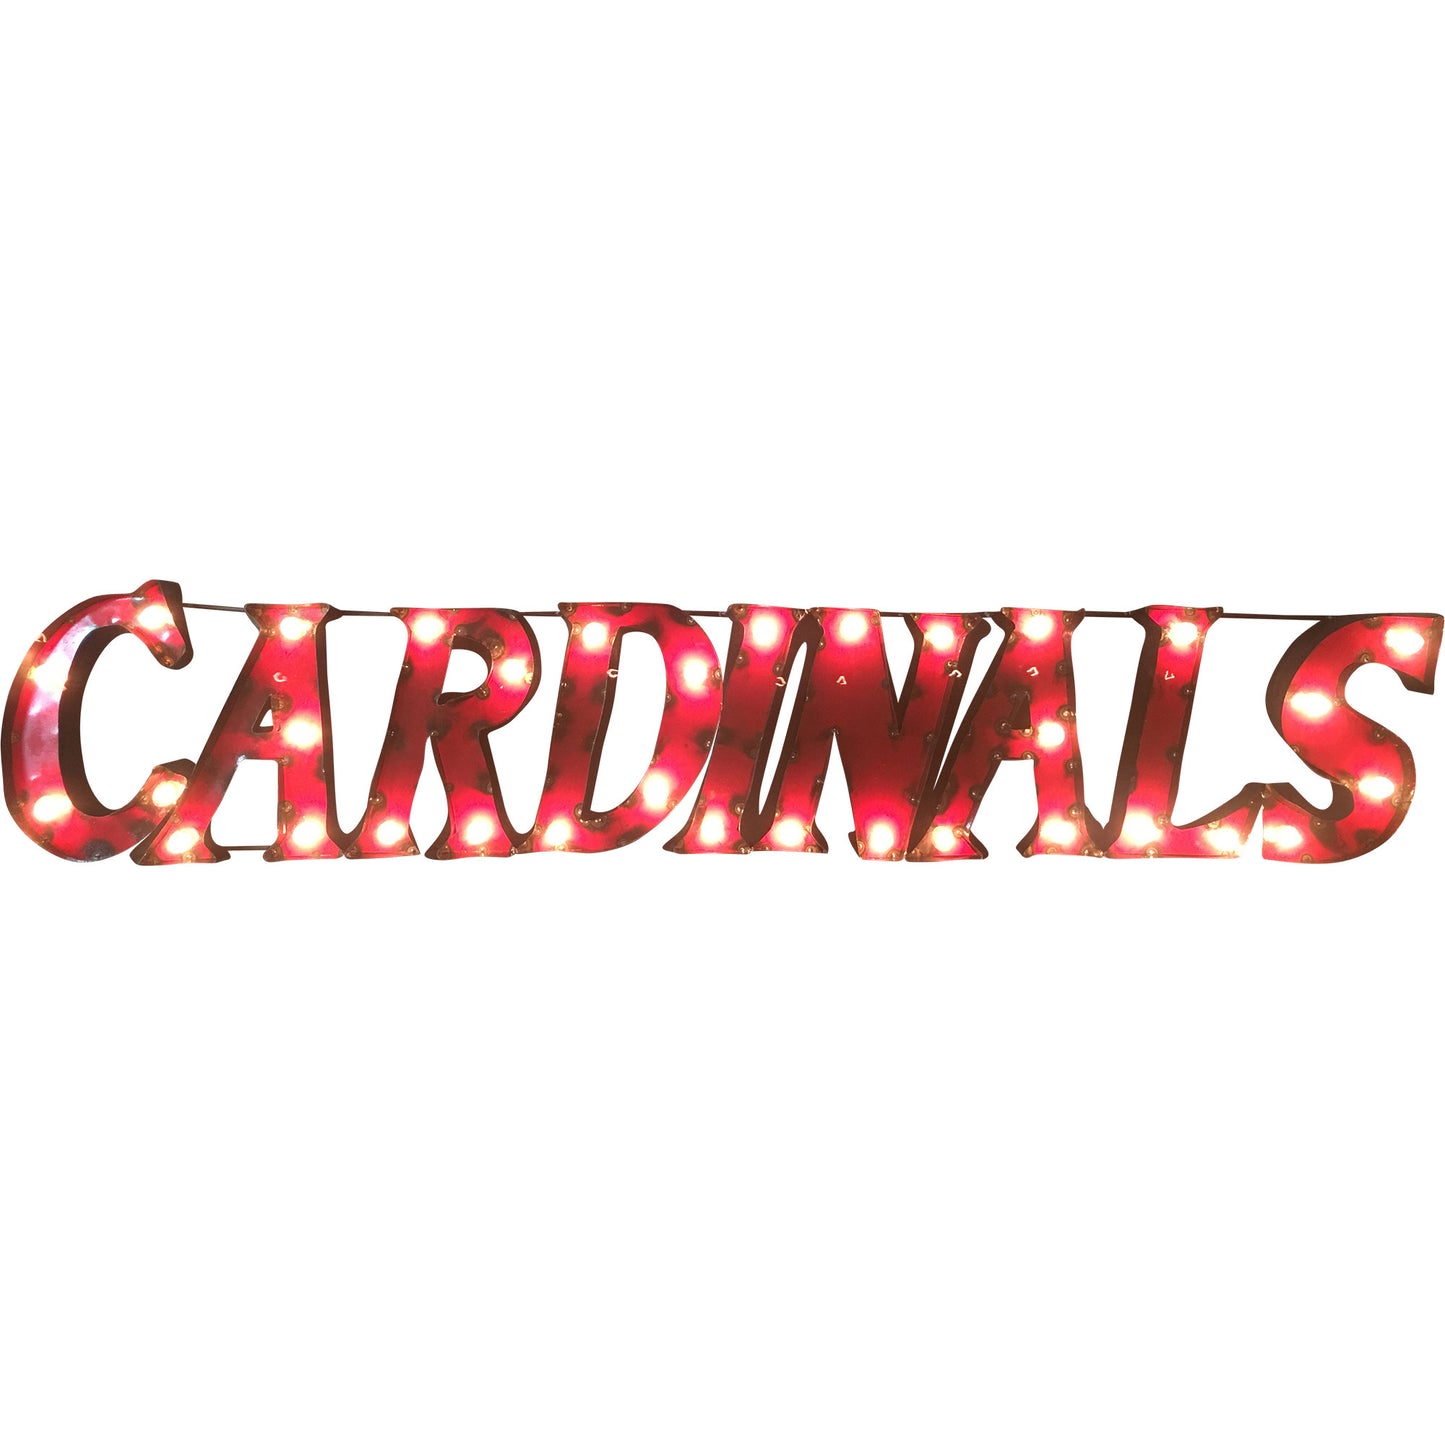 University of Louisville "Cardinals" Lighted Recycled Metal Wall Decor